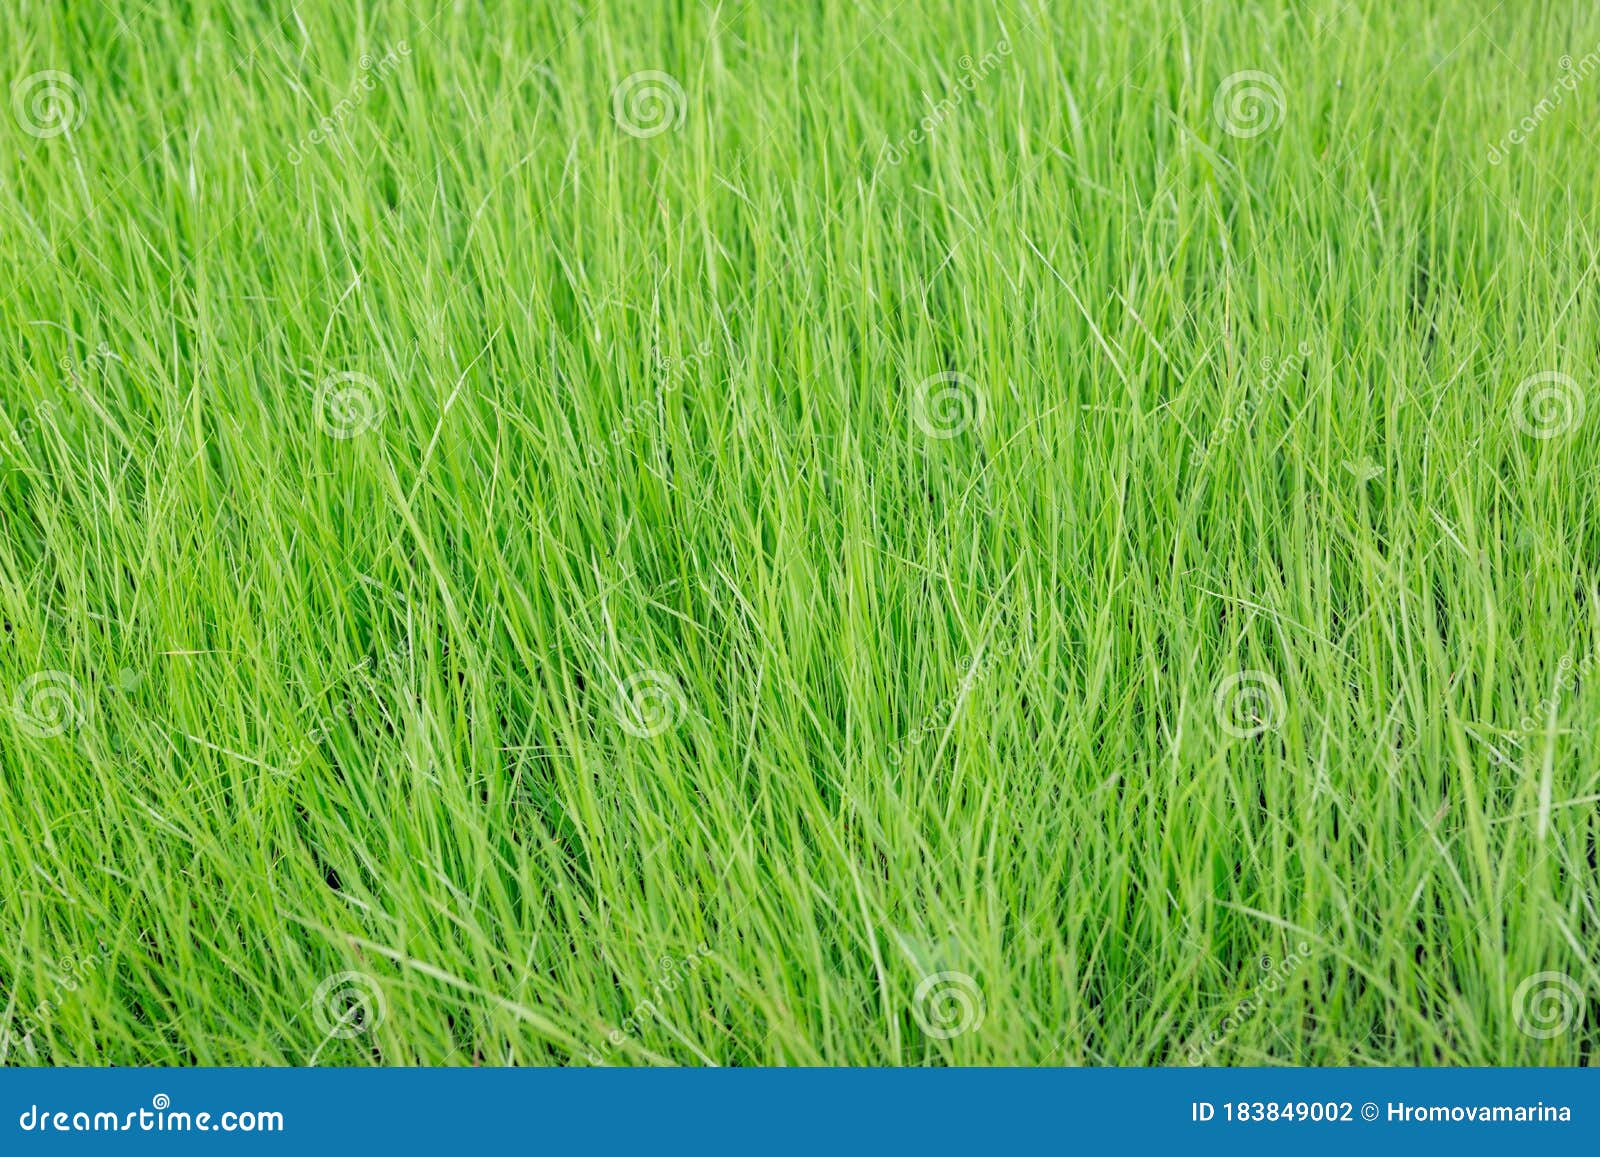 Green Lush Grass on a Sunny Day Stock Photo - Image of outdoor, horizon